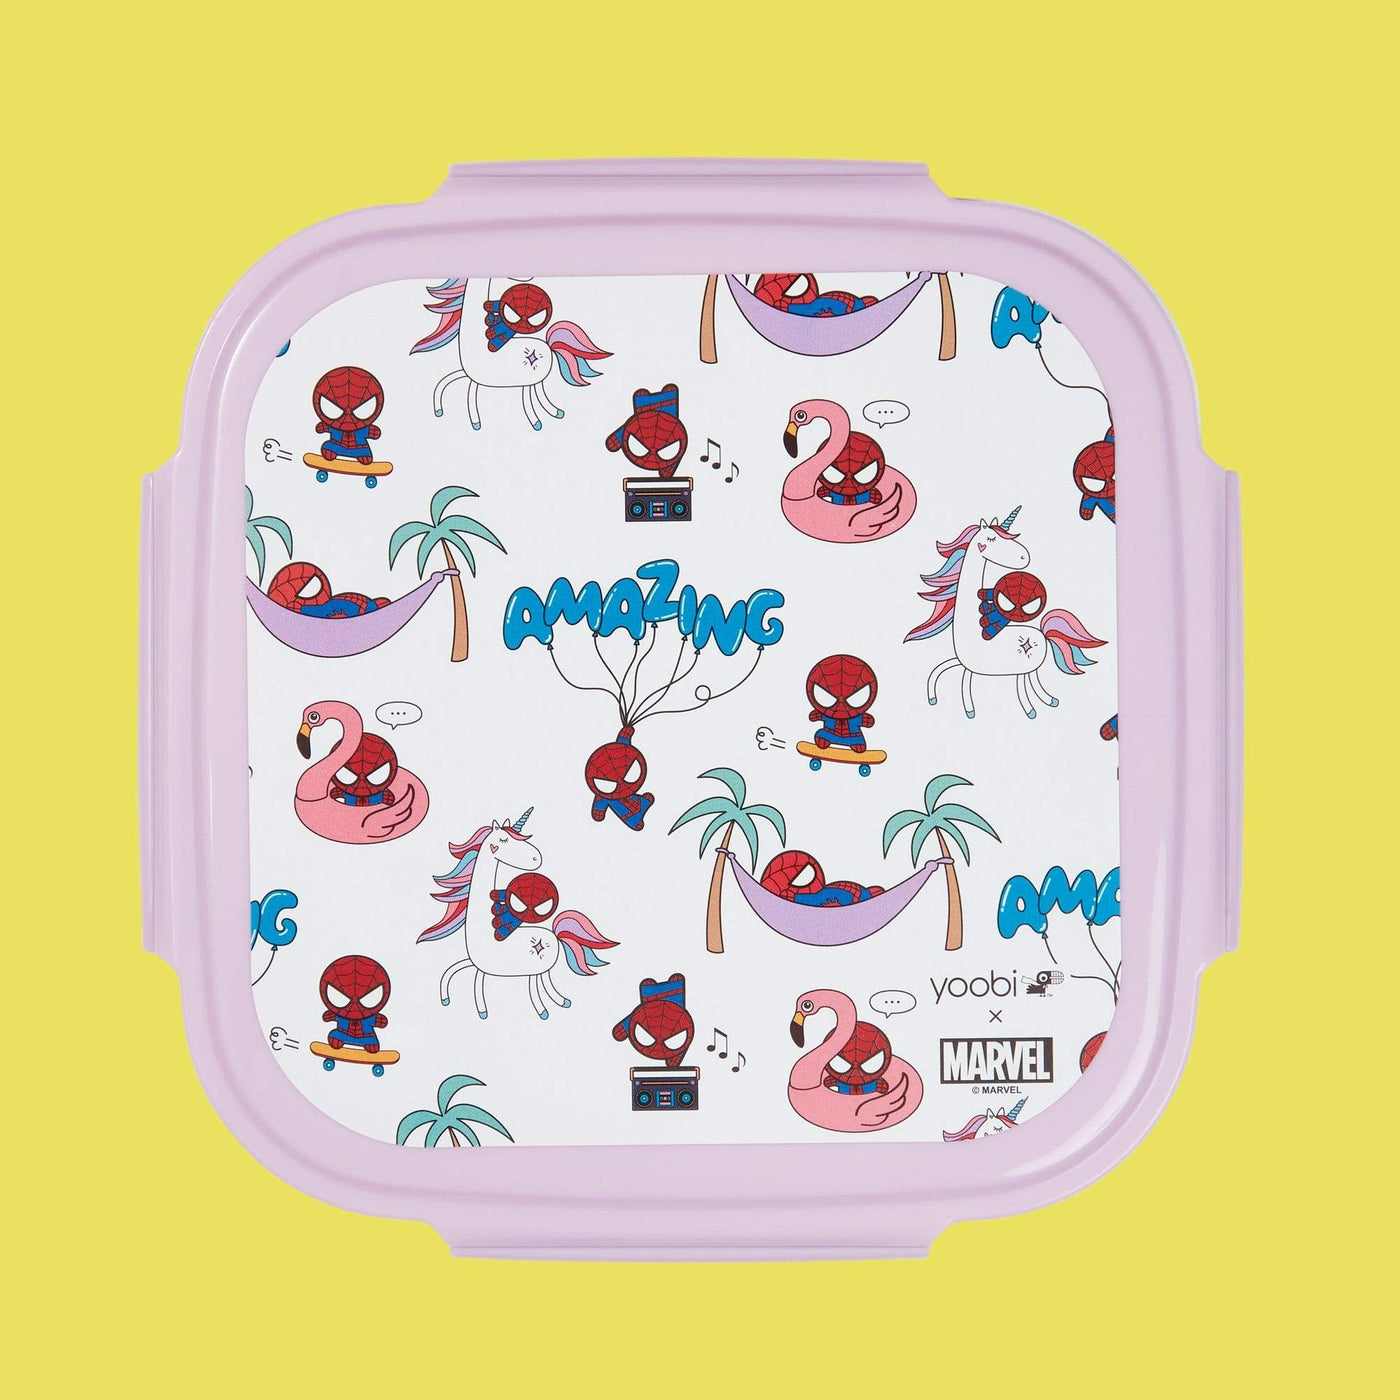  Yoobi x Marvel Spider-Man Bento Box and Ice Pack - 3  Compartment Lunch Box, Dishwasher & Microwave Safe Food & Snack Container  for Kids & Adults - BPA & PVC Free